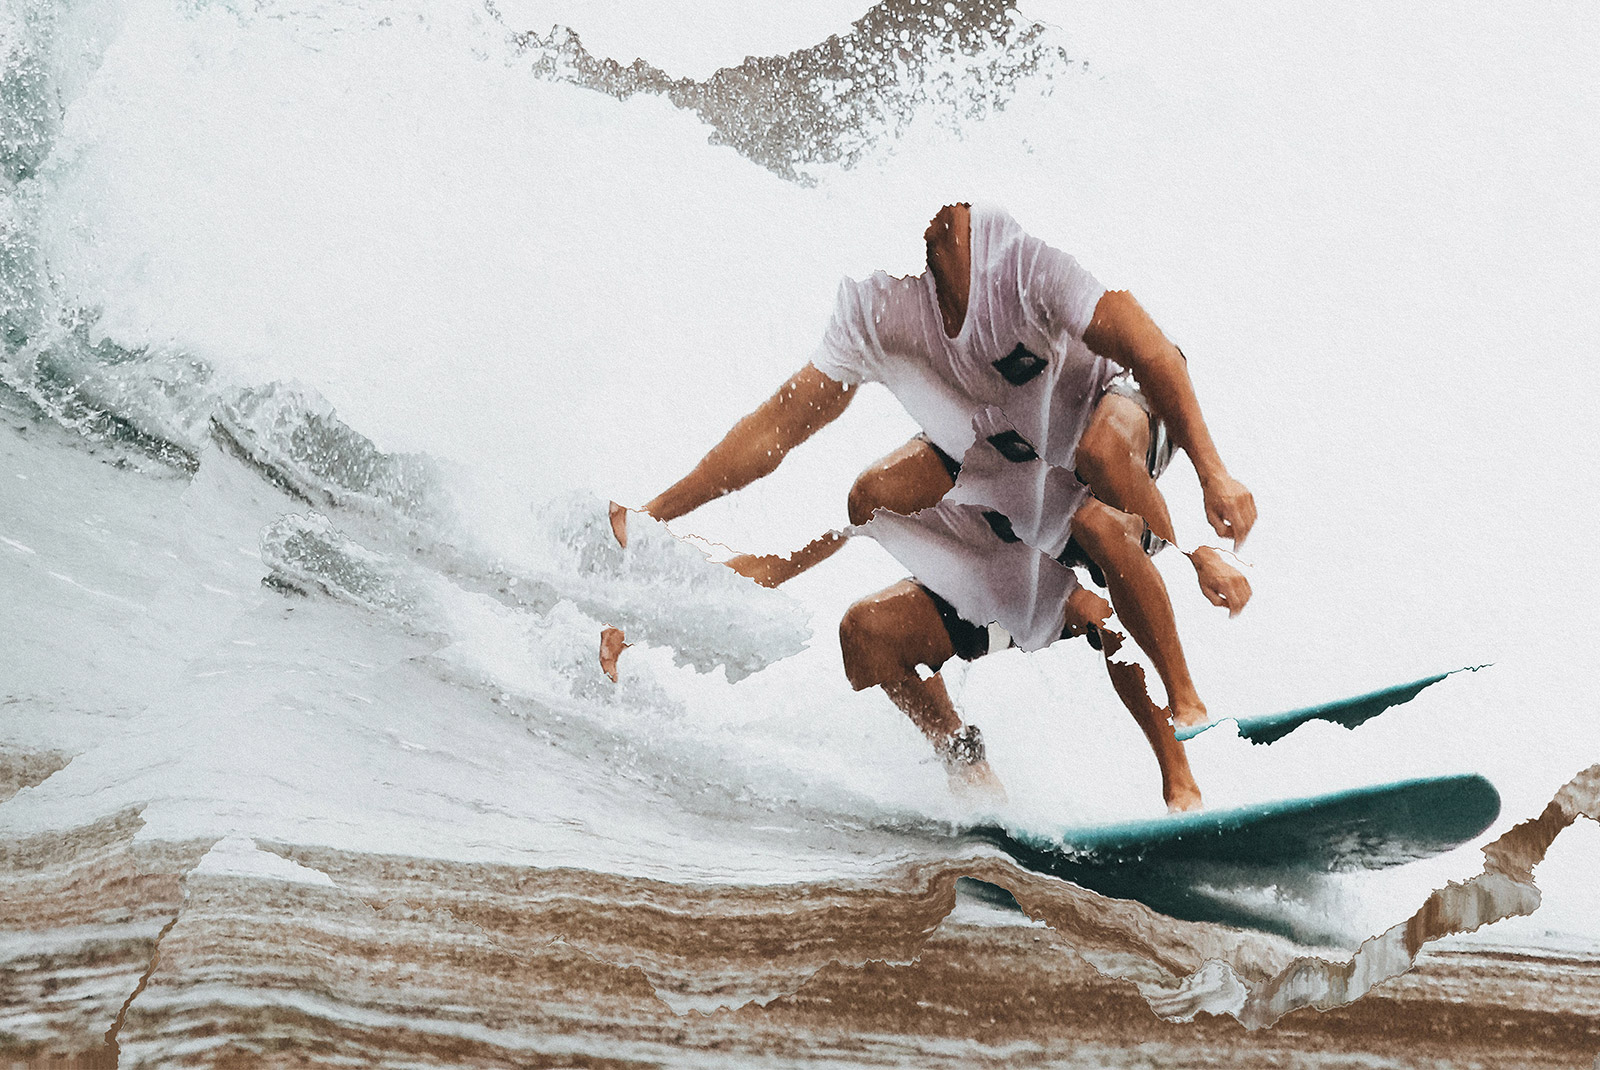 Dynamic surfing action photo, ideal for sports template designs, featuring a surfer riding a wave, suitable for graphic overlays.